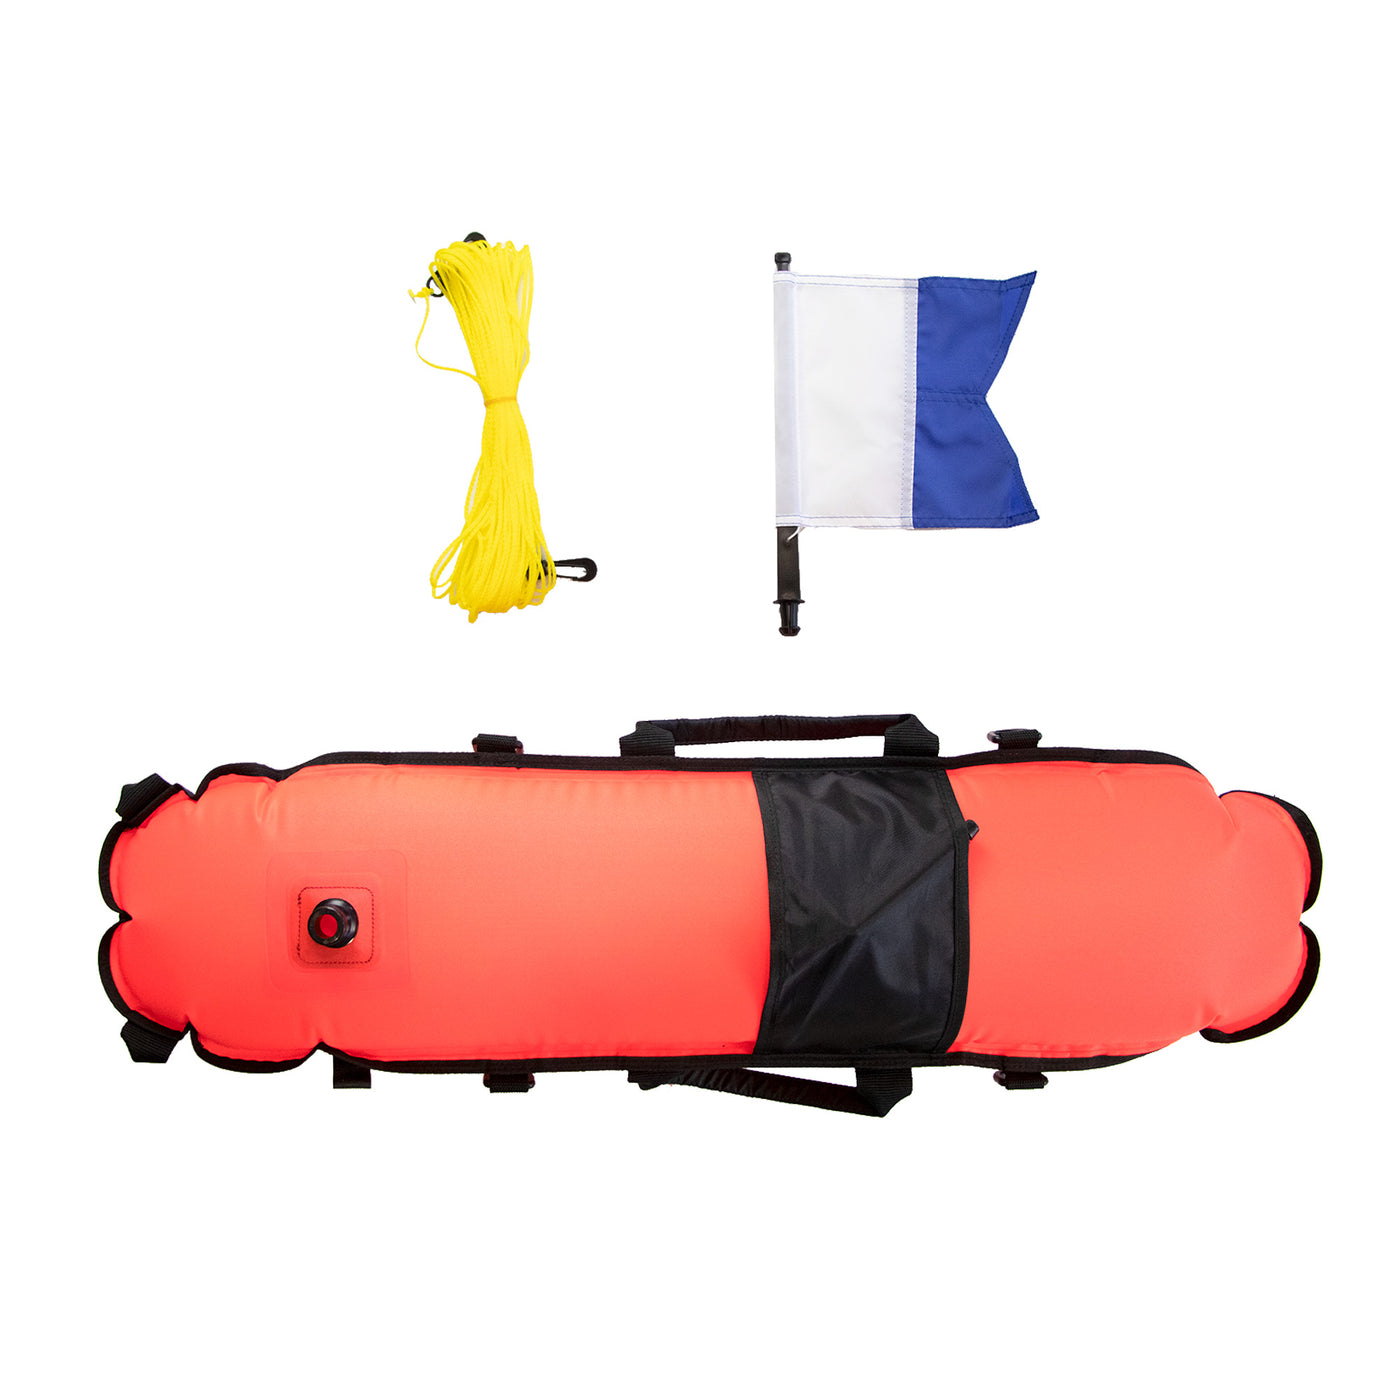 Neptune Inflatable Float with Flag Orange - Red